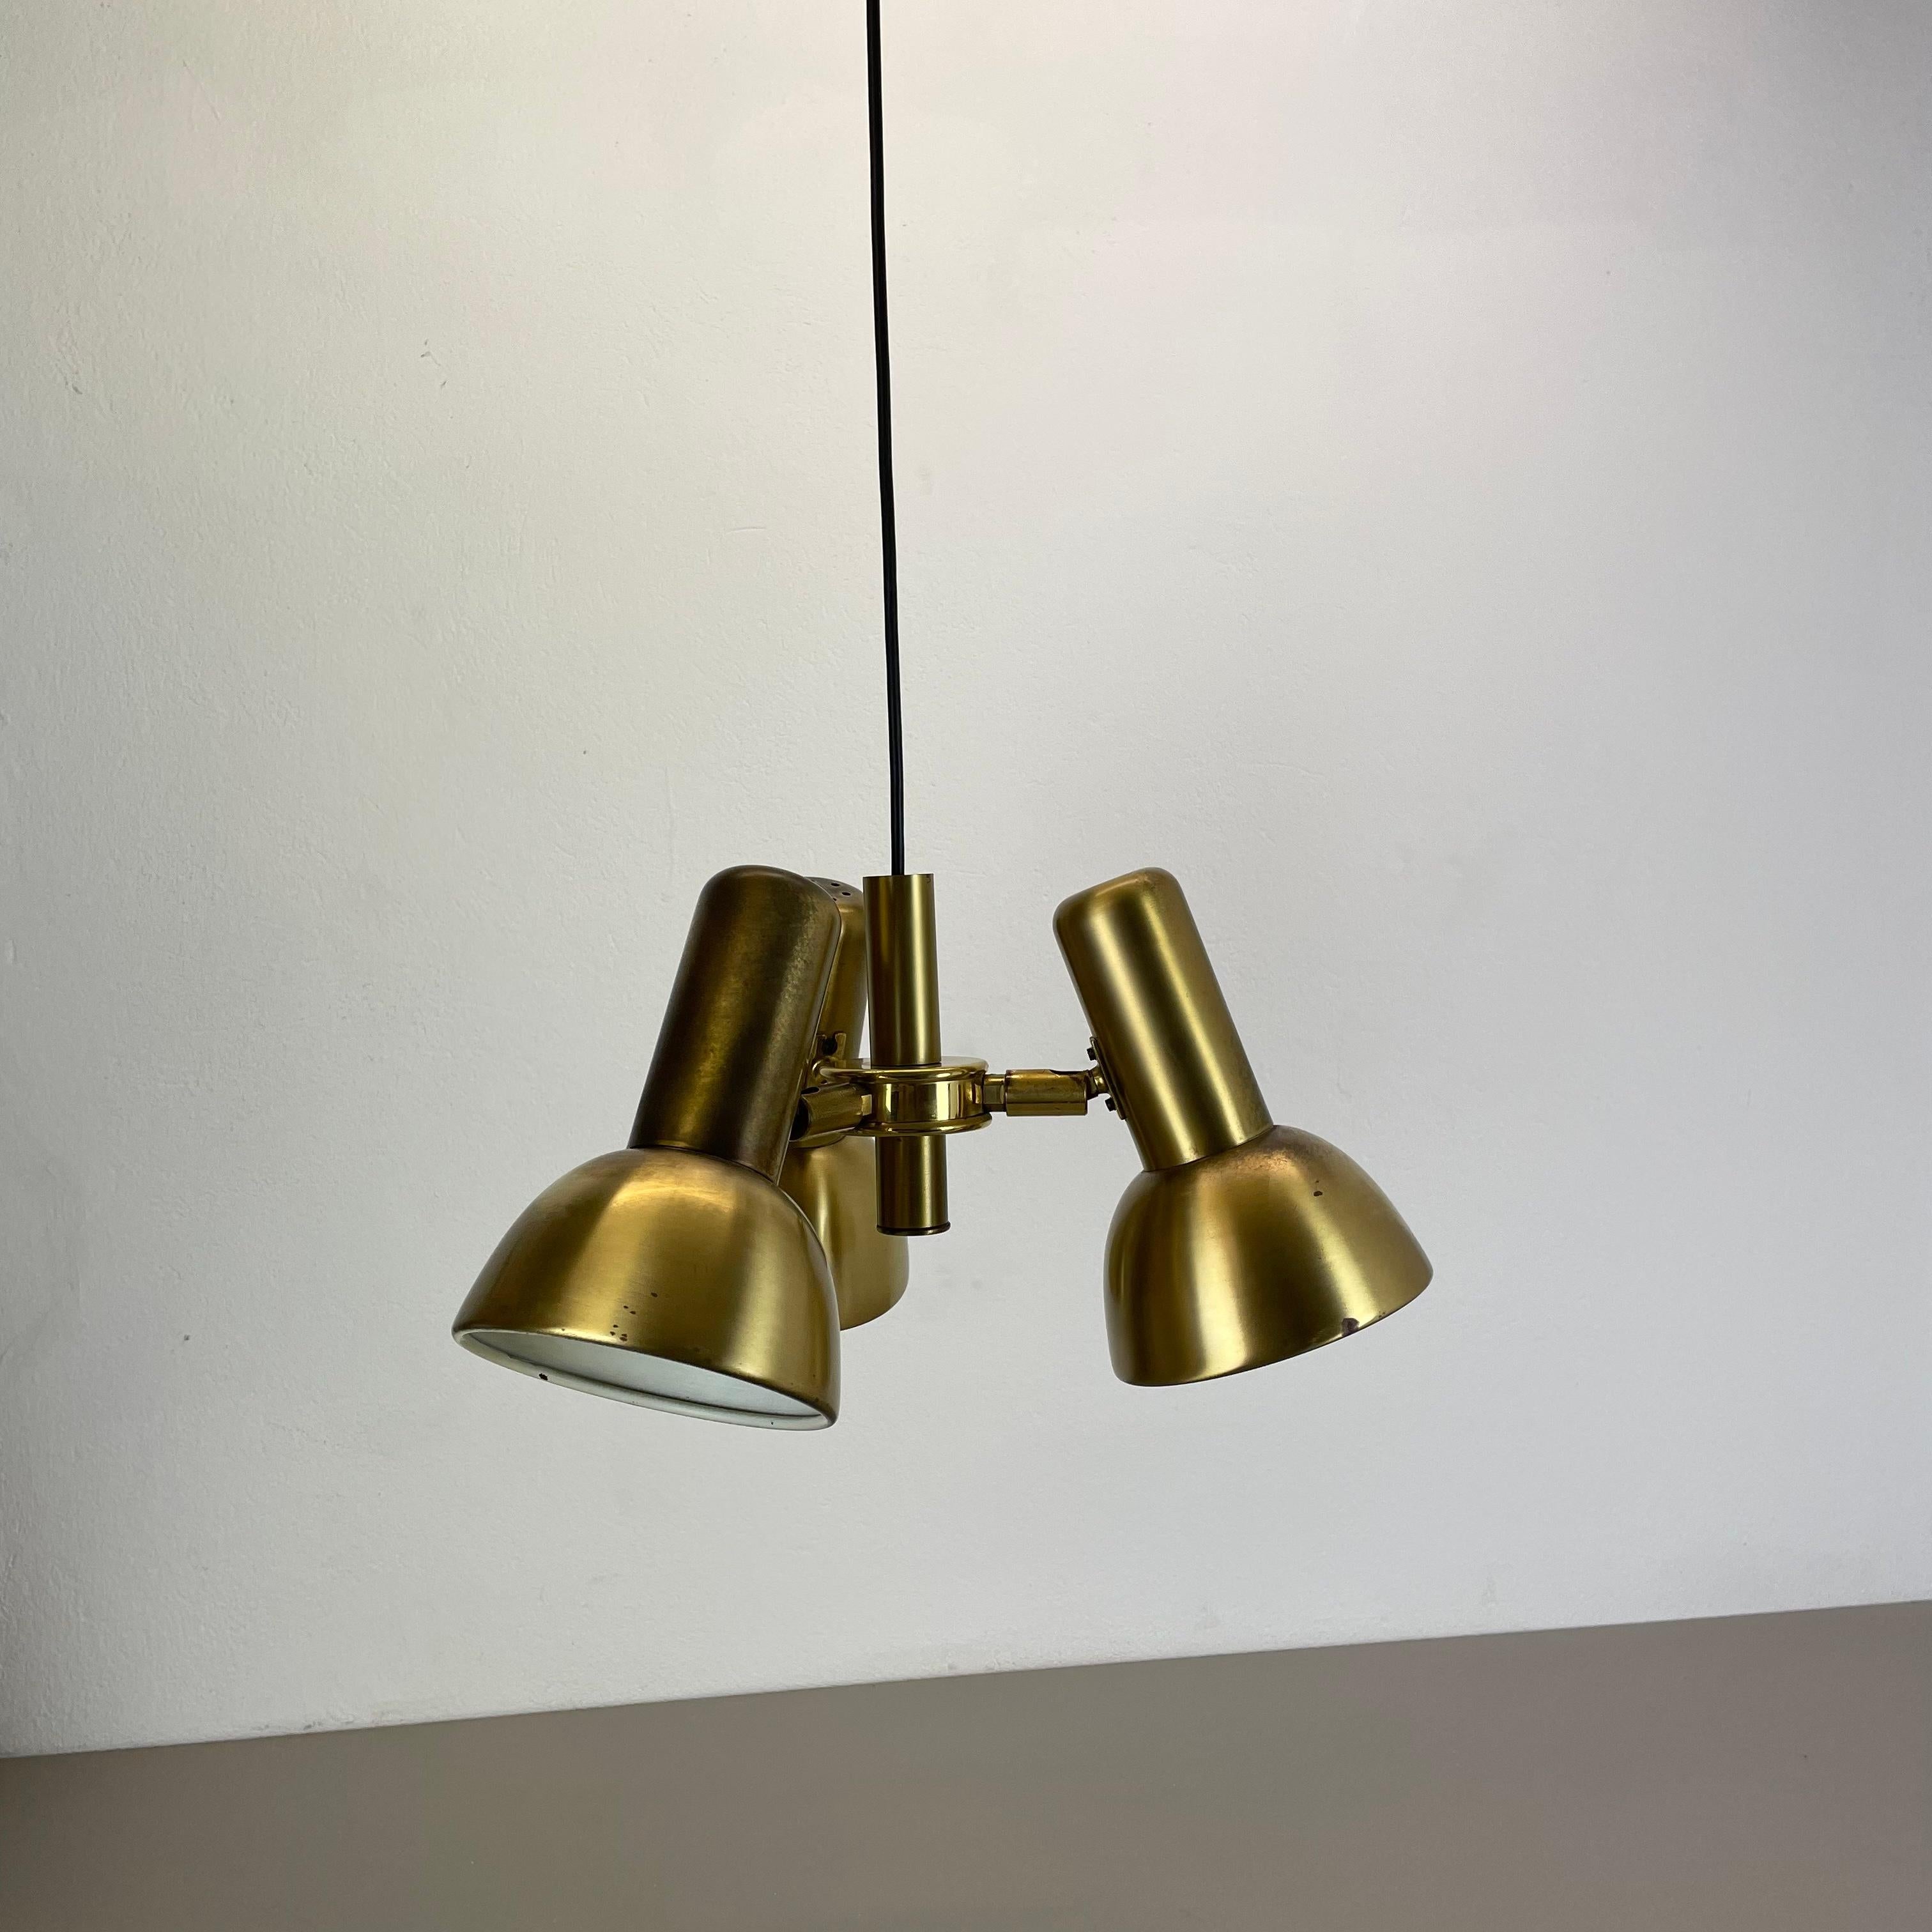 3-Spot Brass Tone Hanging Light Koch and Lowy Style OMI Lighting, Germany, 1970 For Sale 1